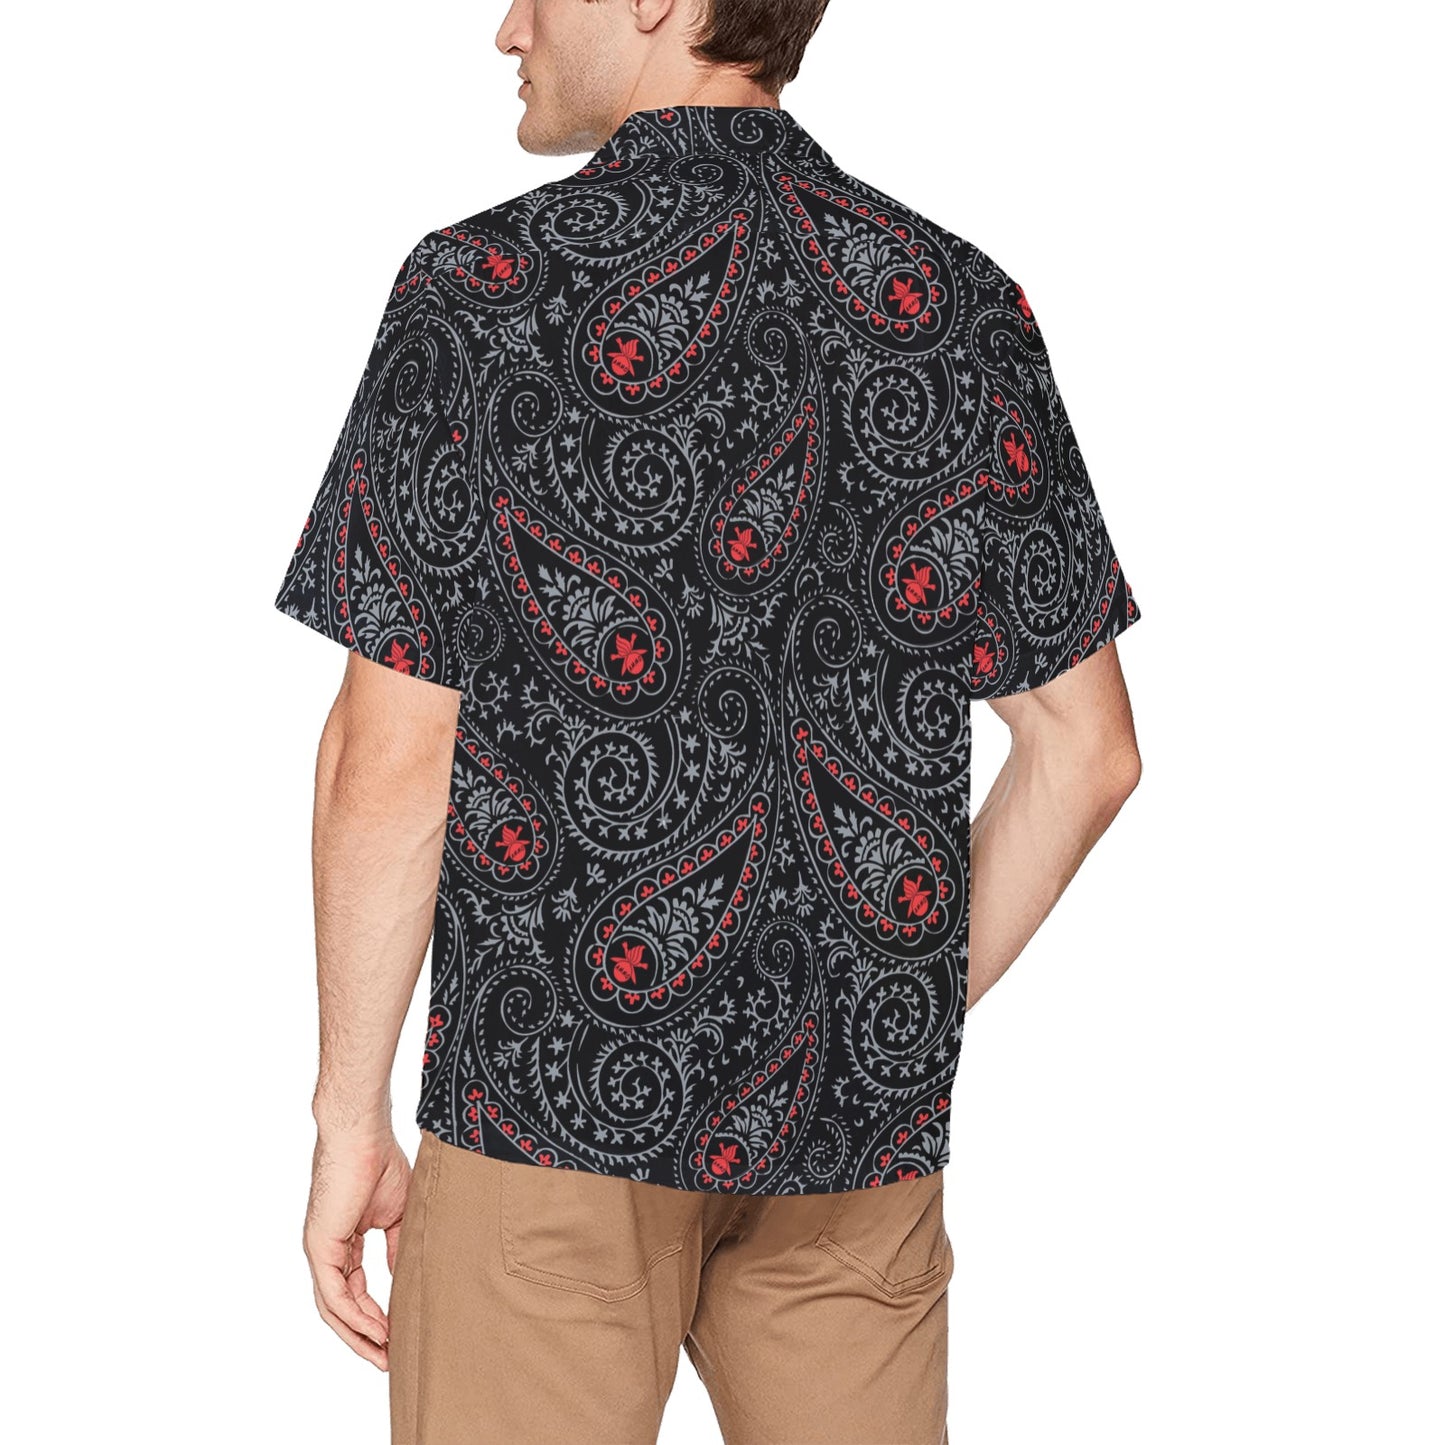 AMMO Paisley Black Grey and Red Pisspot With Crossed Bombs Pattern Mens Left Chest Pocket Hawaiian Shirt